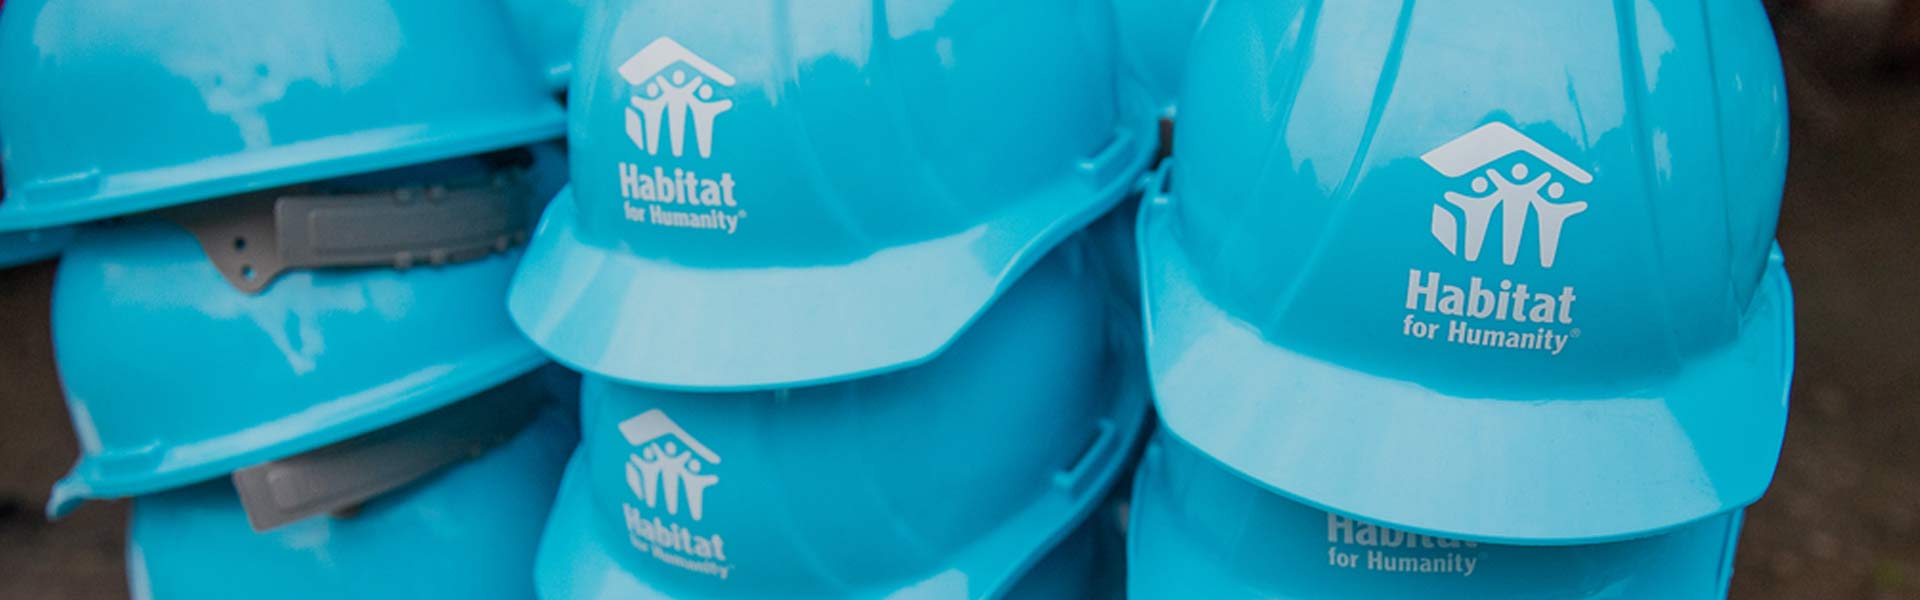 Elected Officials Support Affordable Housing Efforts with Habitat for Humanity